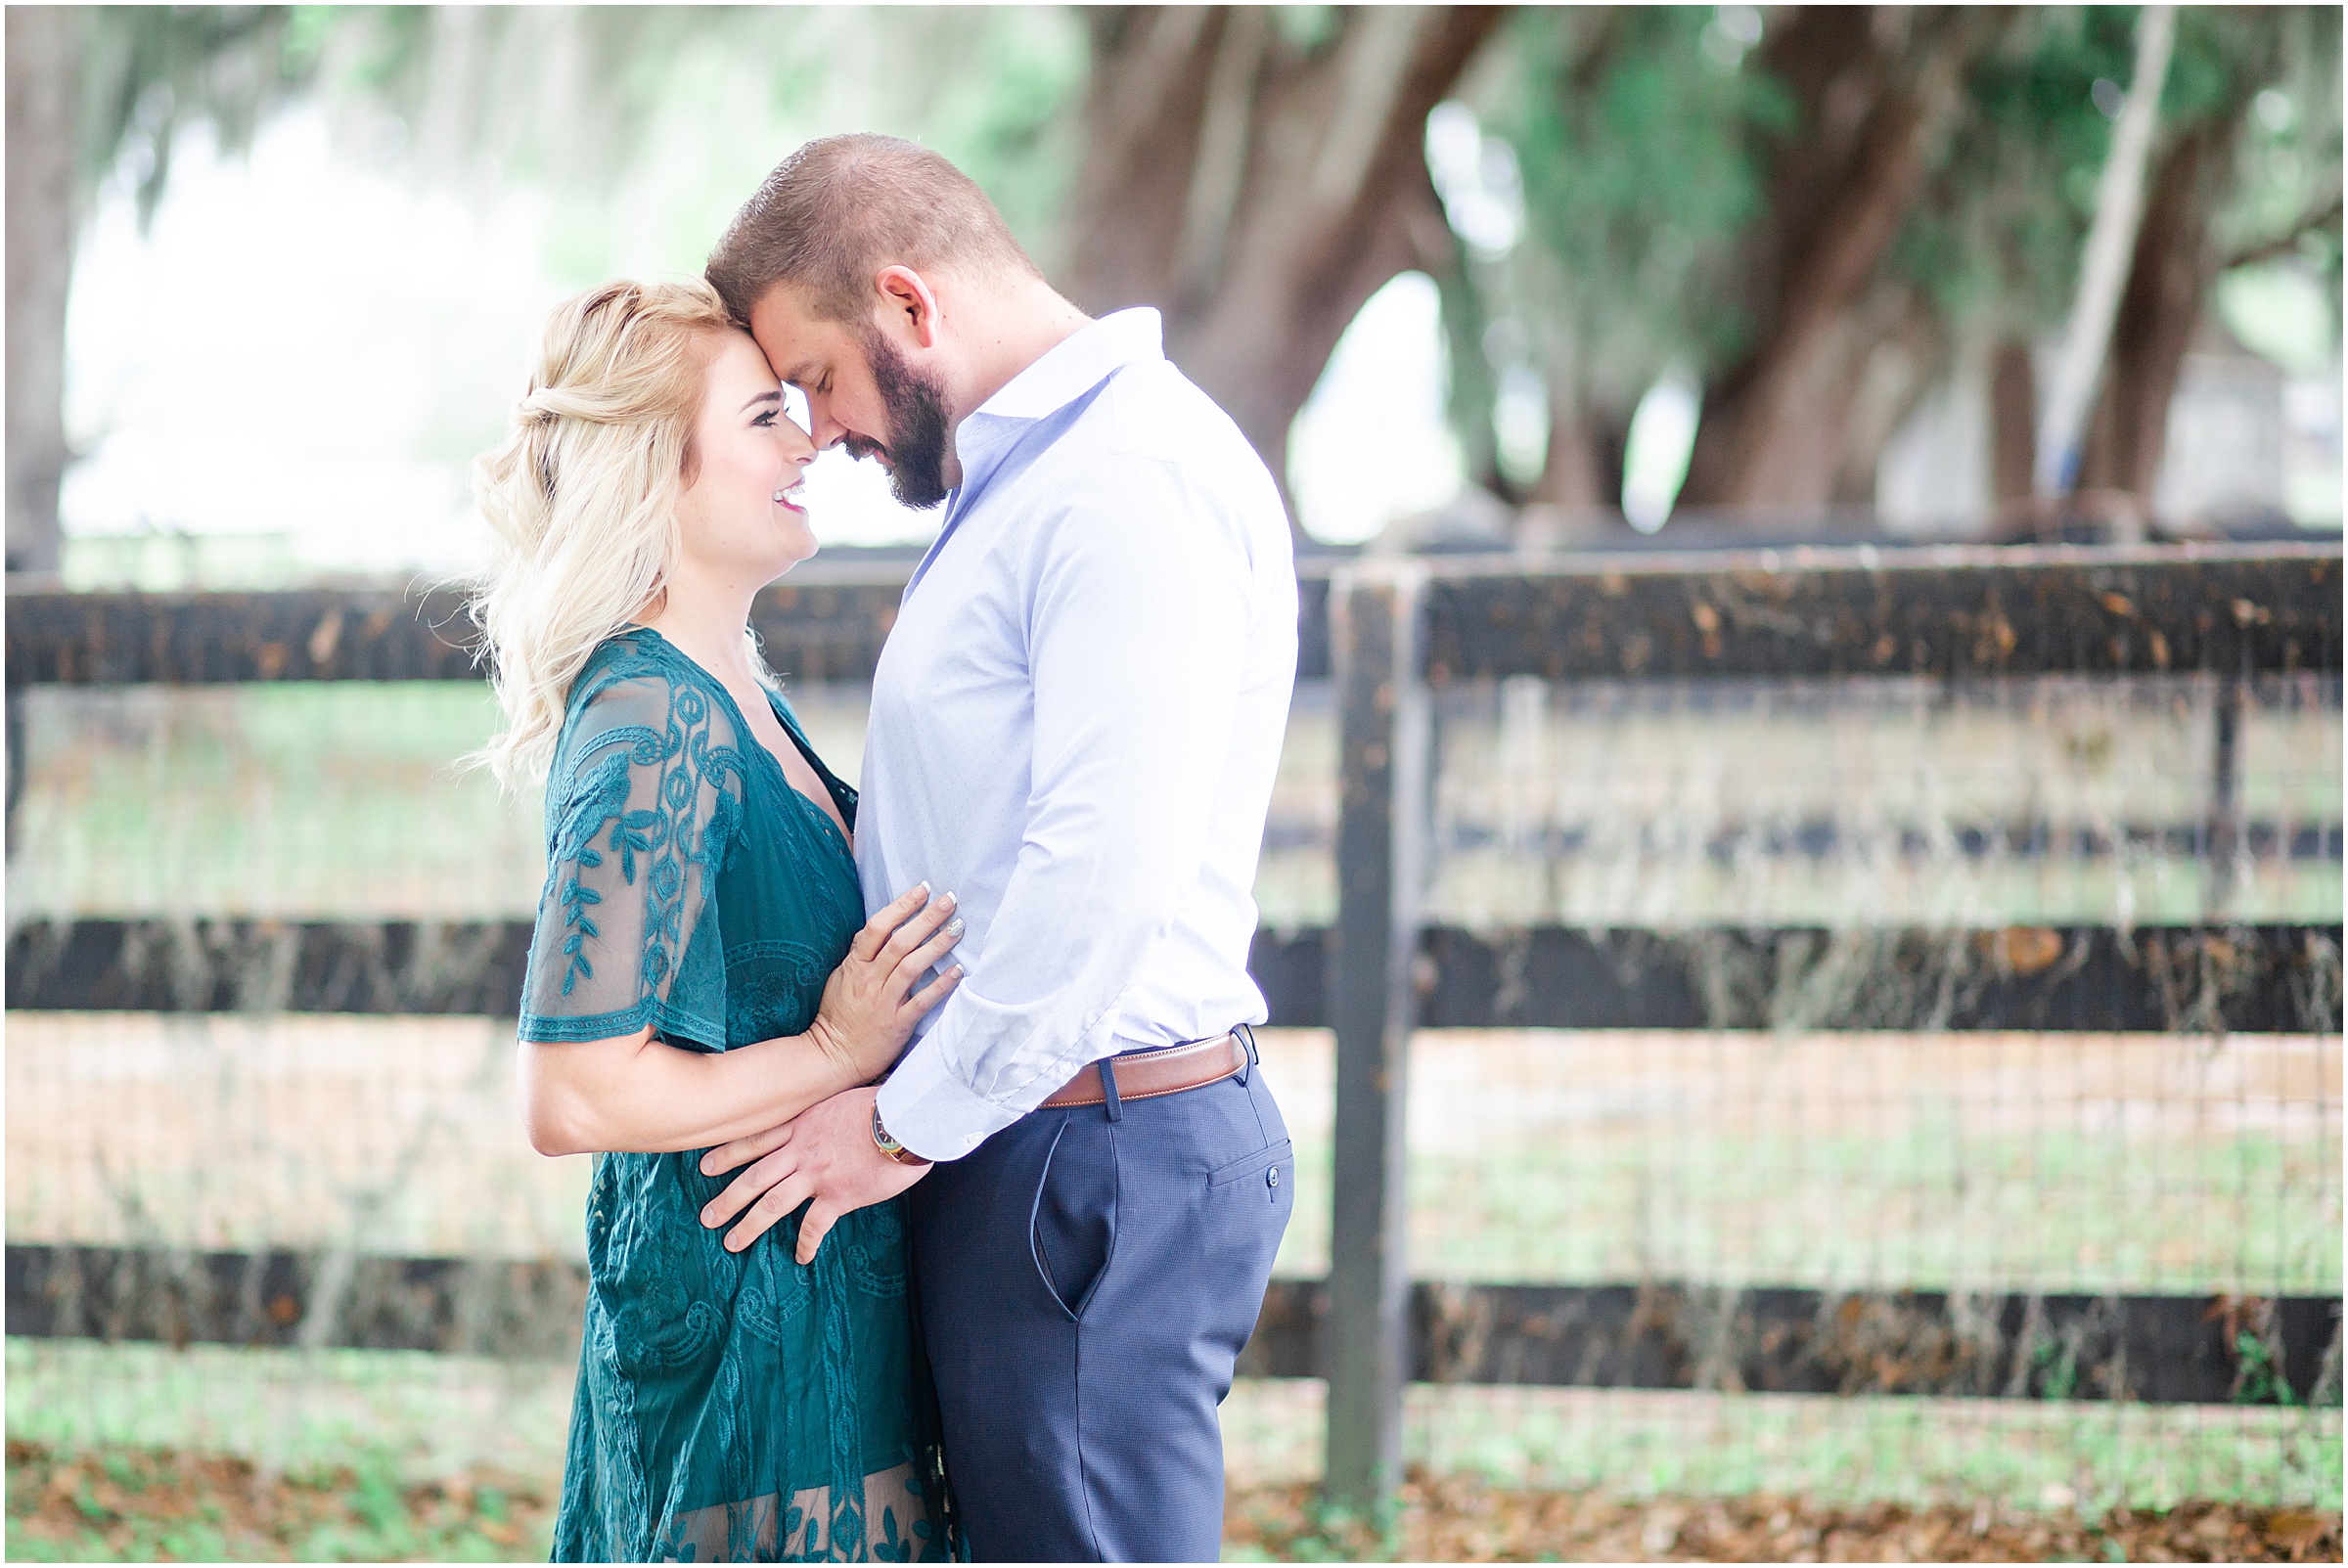 Couple engaged for 3 years, Brooke & Jeremy take engagement pictures at Covington Farms in Dade City, Florida.